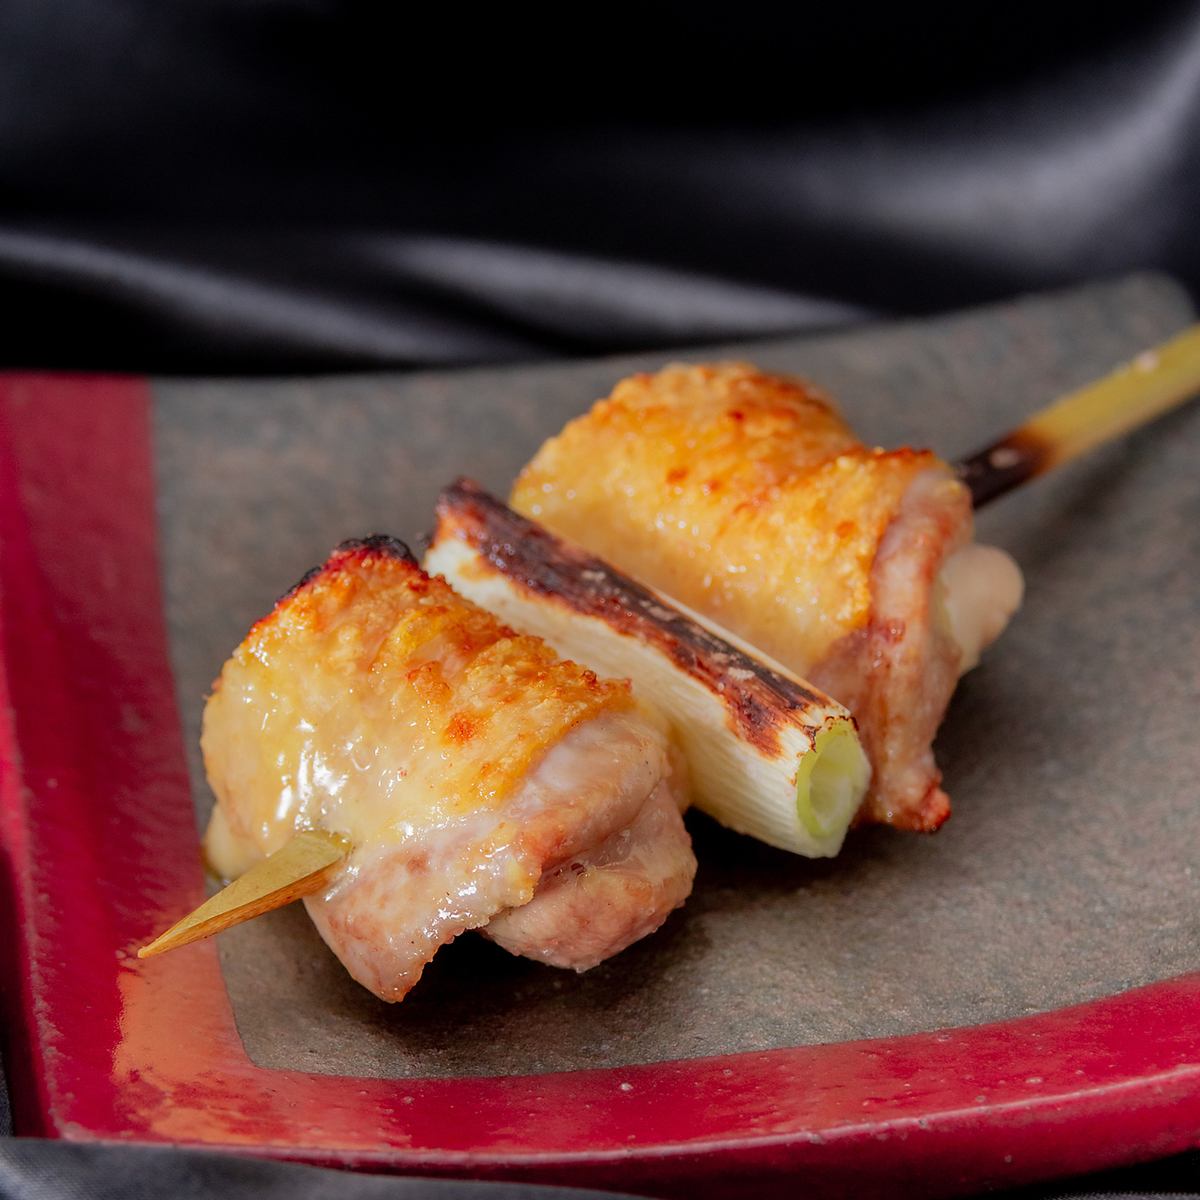 Please enjoy our yakitori made with Hakata Jidori, which we are proud of.